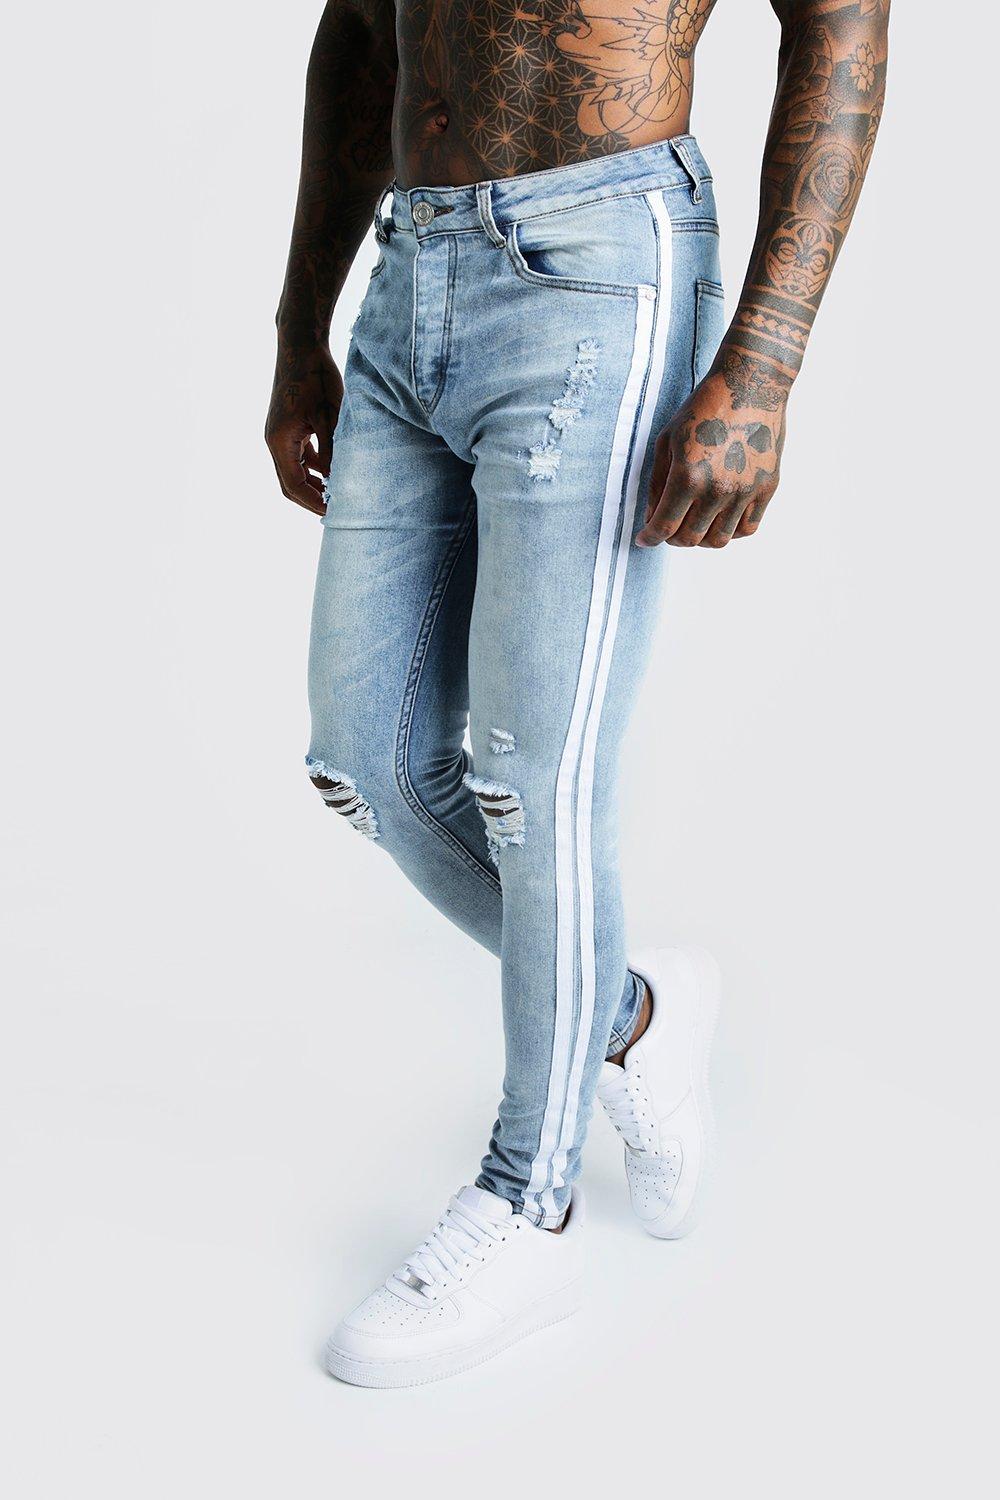 mens jeans with side tape